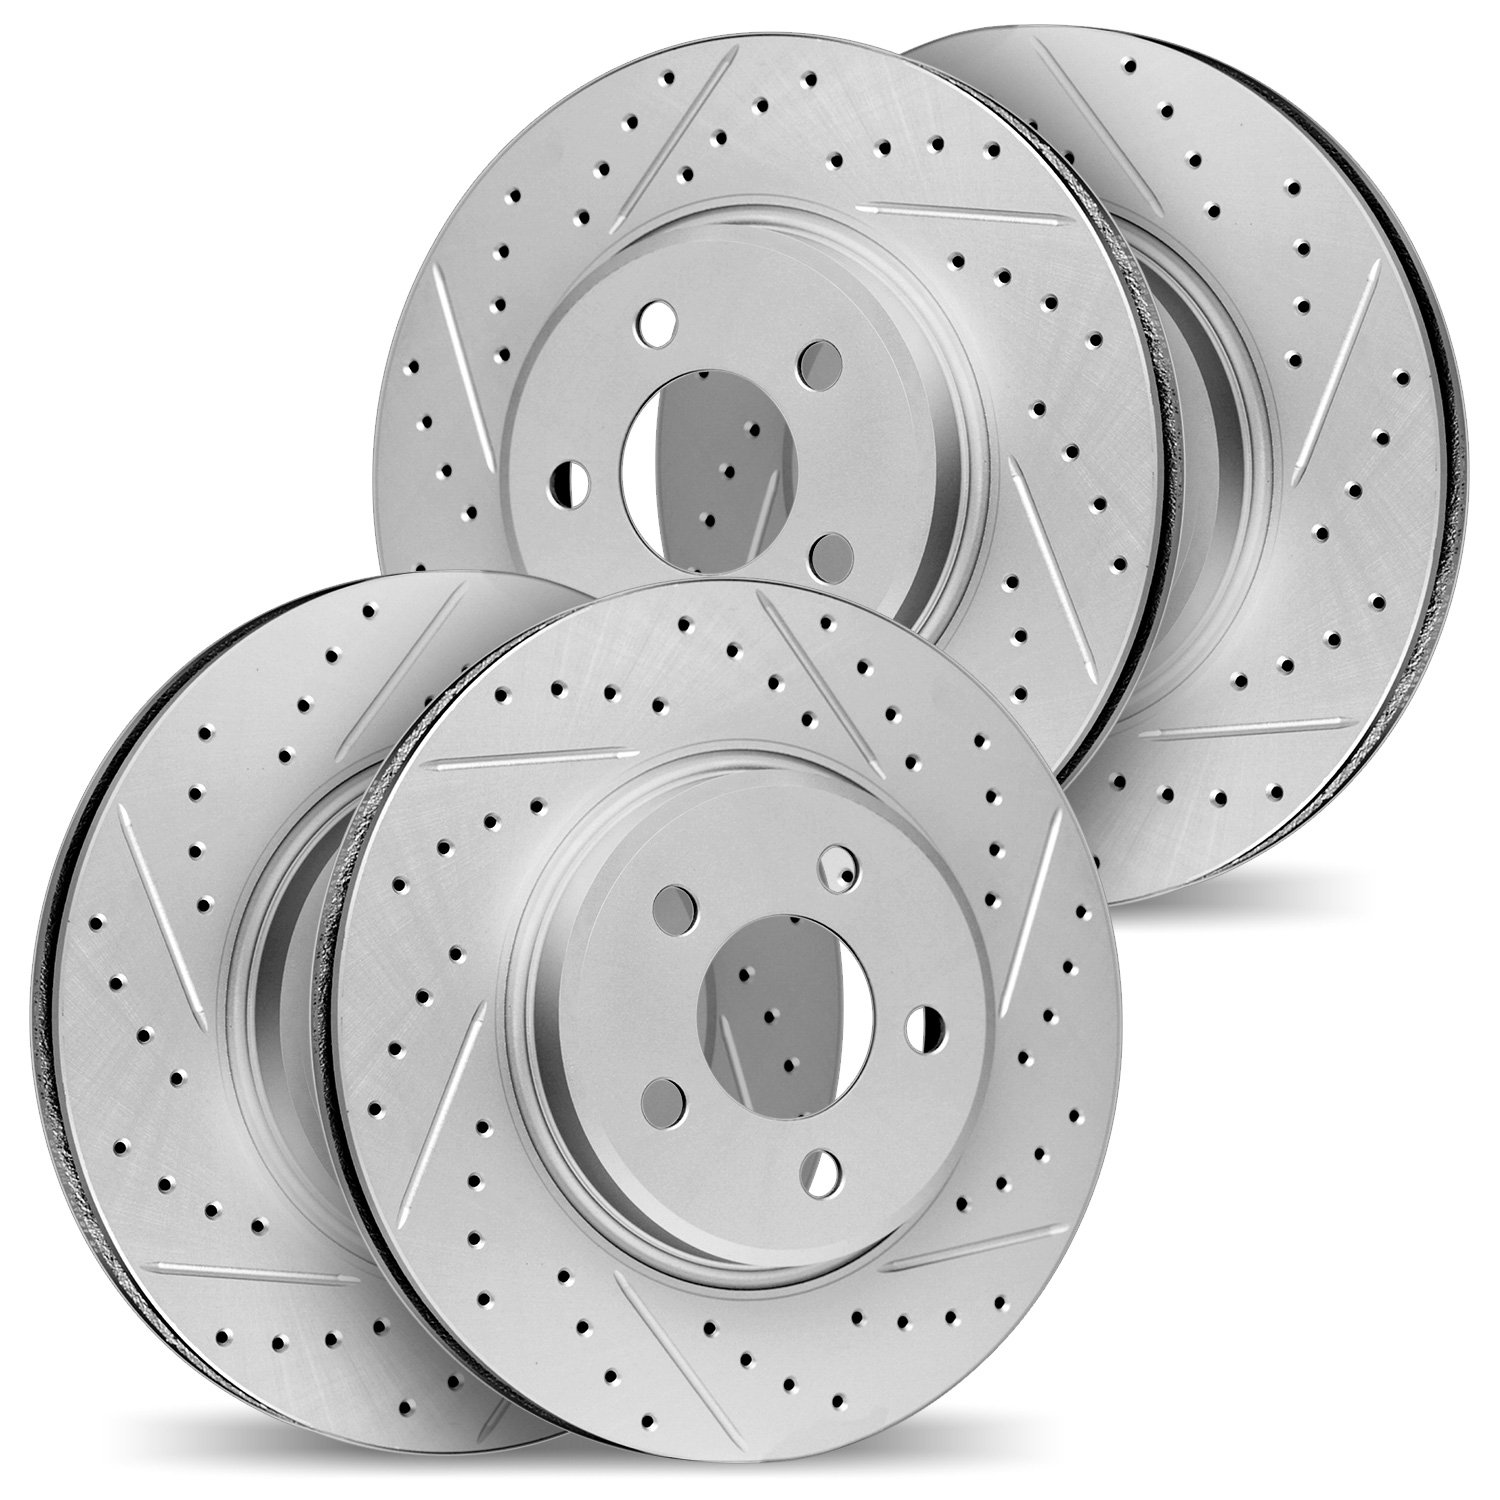 2004-65002 Geoperformance Drilled/Slotted Brake Rotors, 2003-2011 GM, Position: Front and Rear